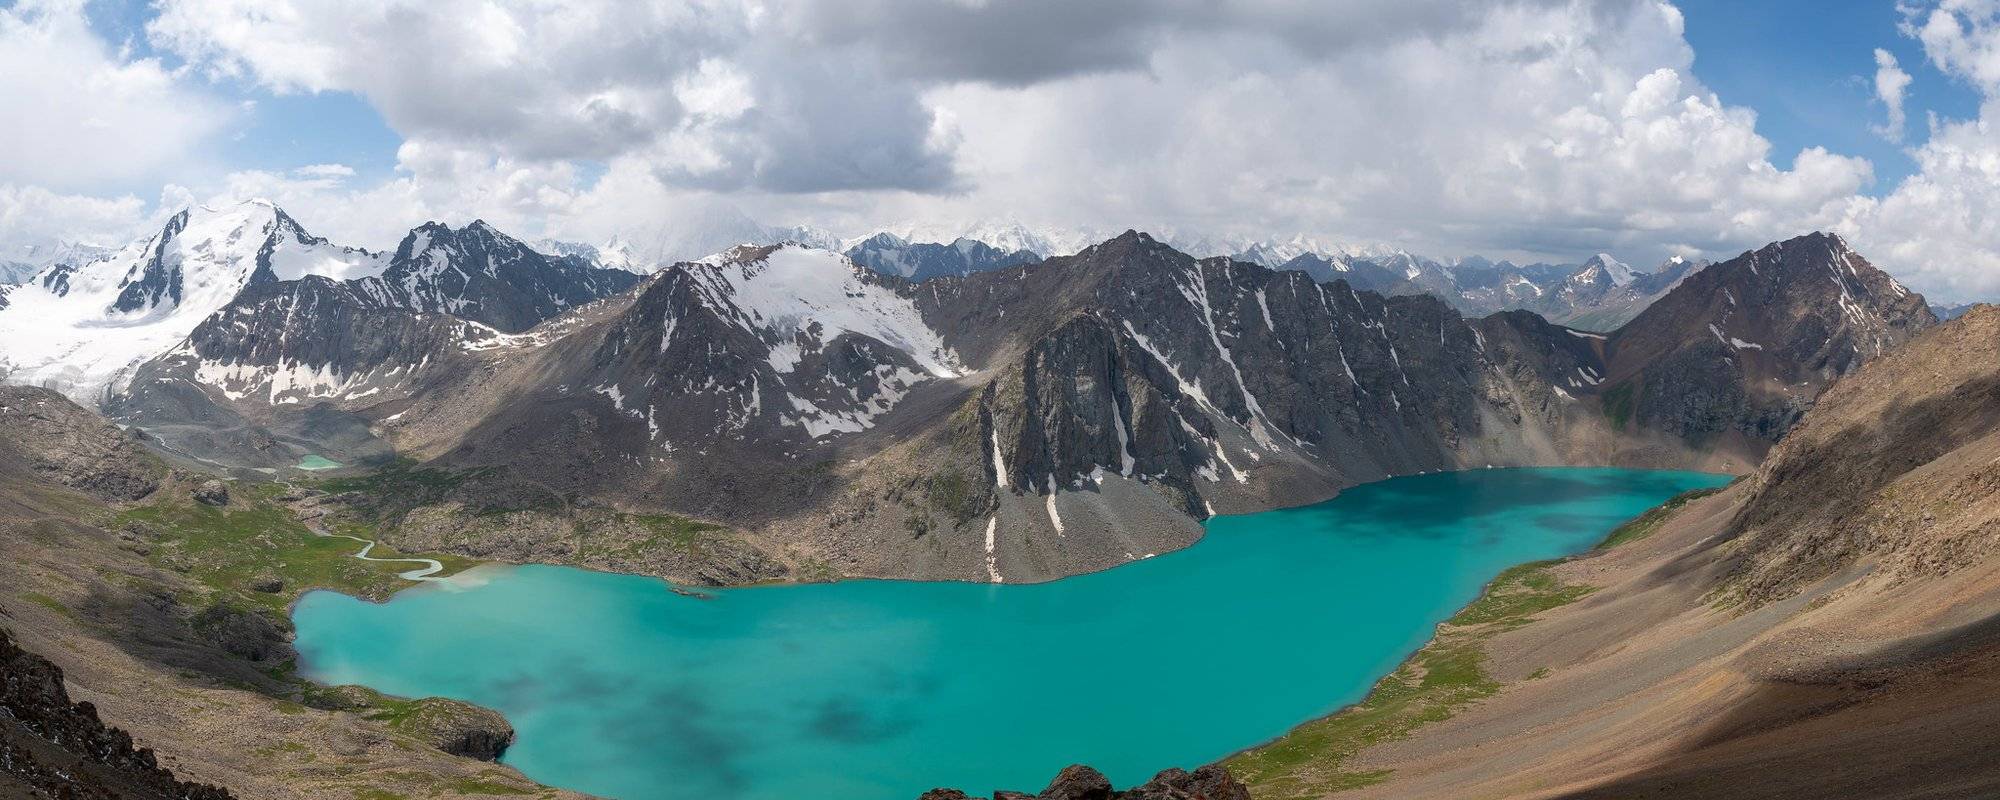 Travel: Kyrgyzstan at it's finest